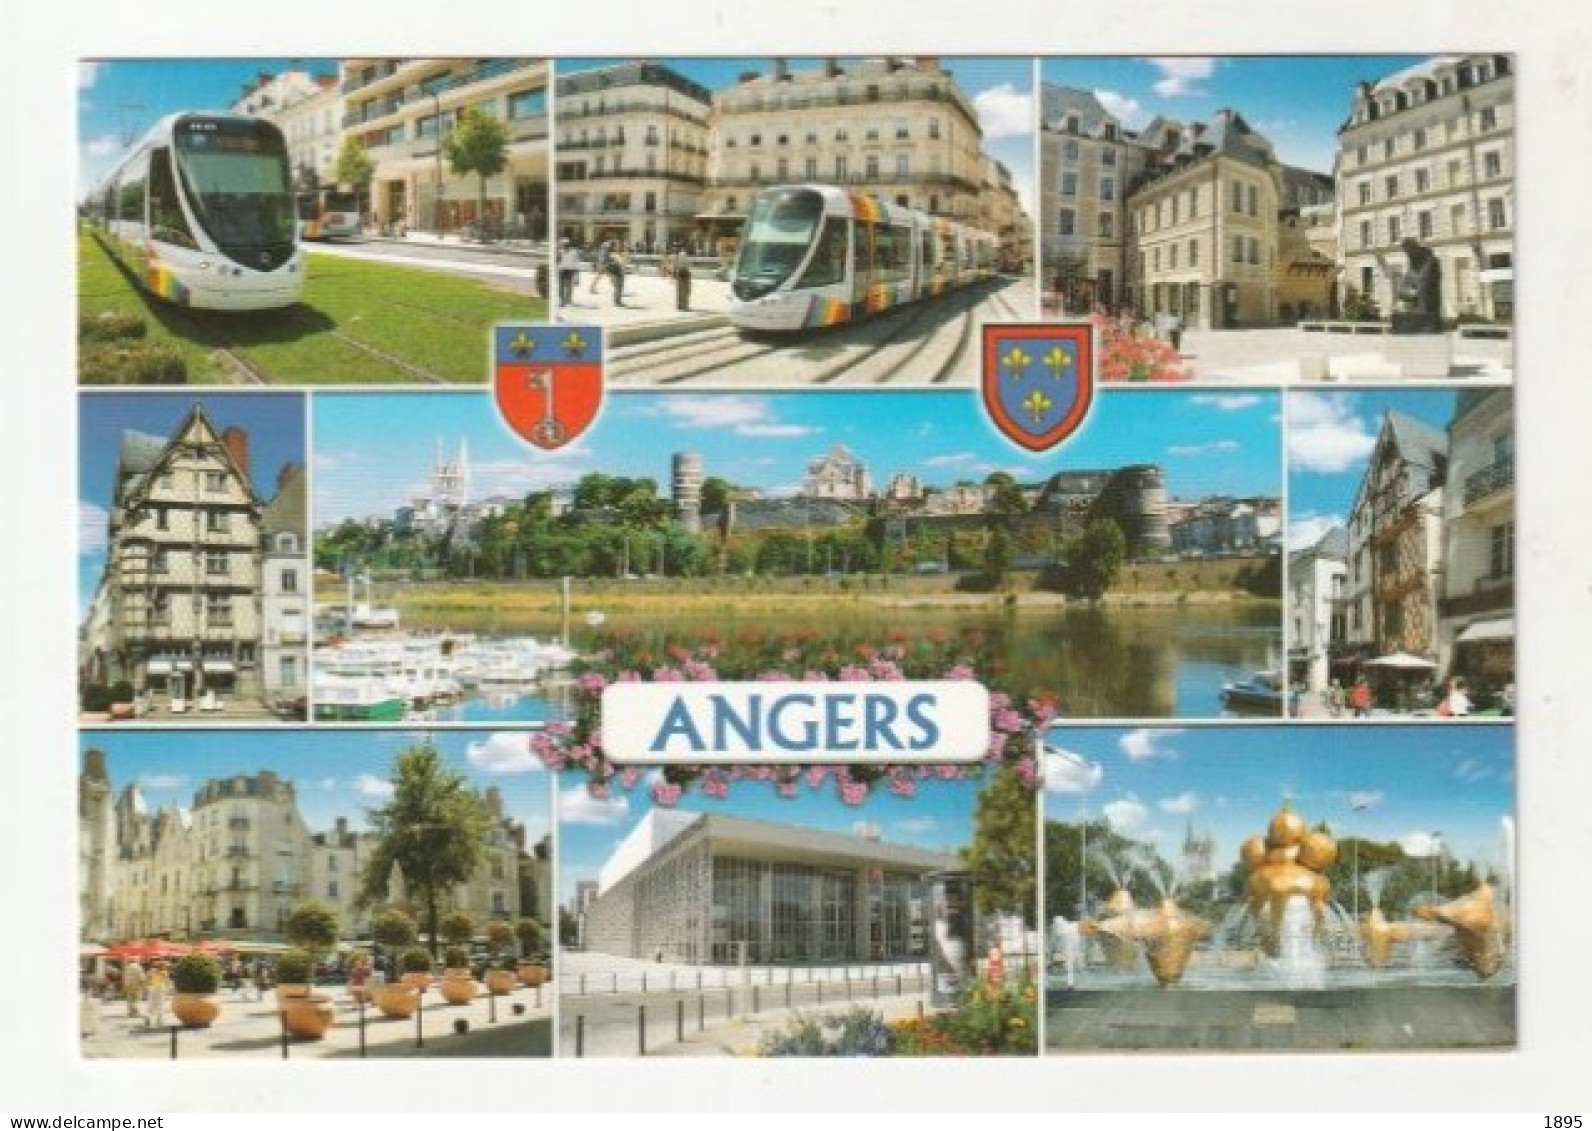 ANGERS - Angers